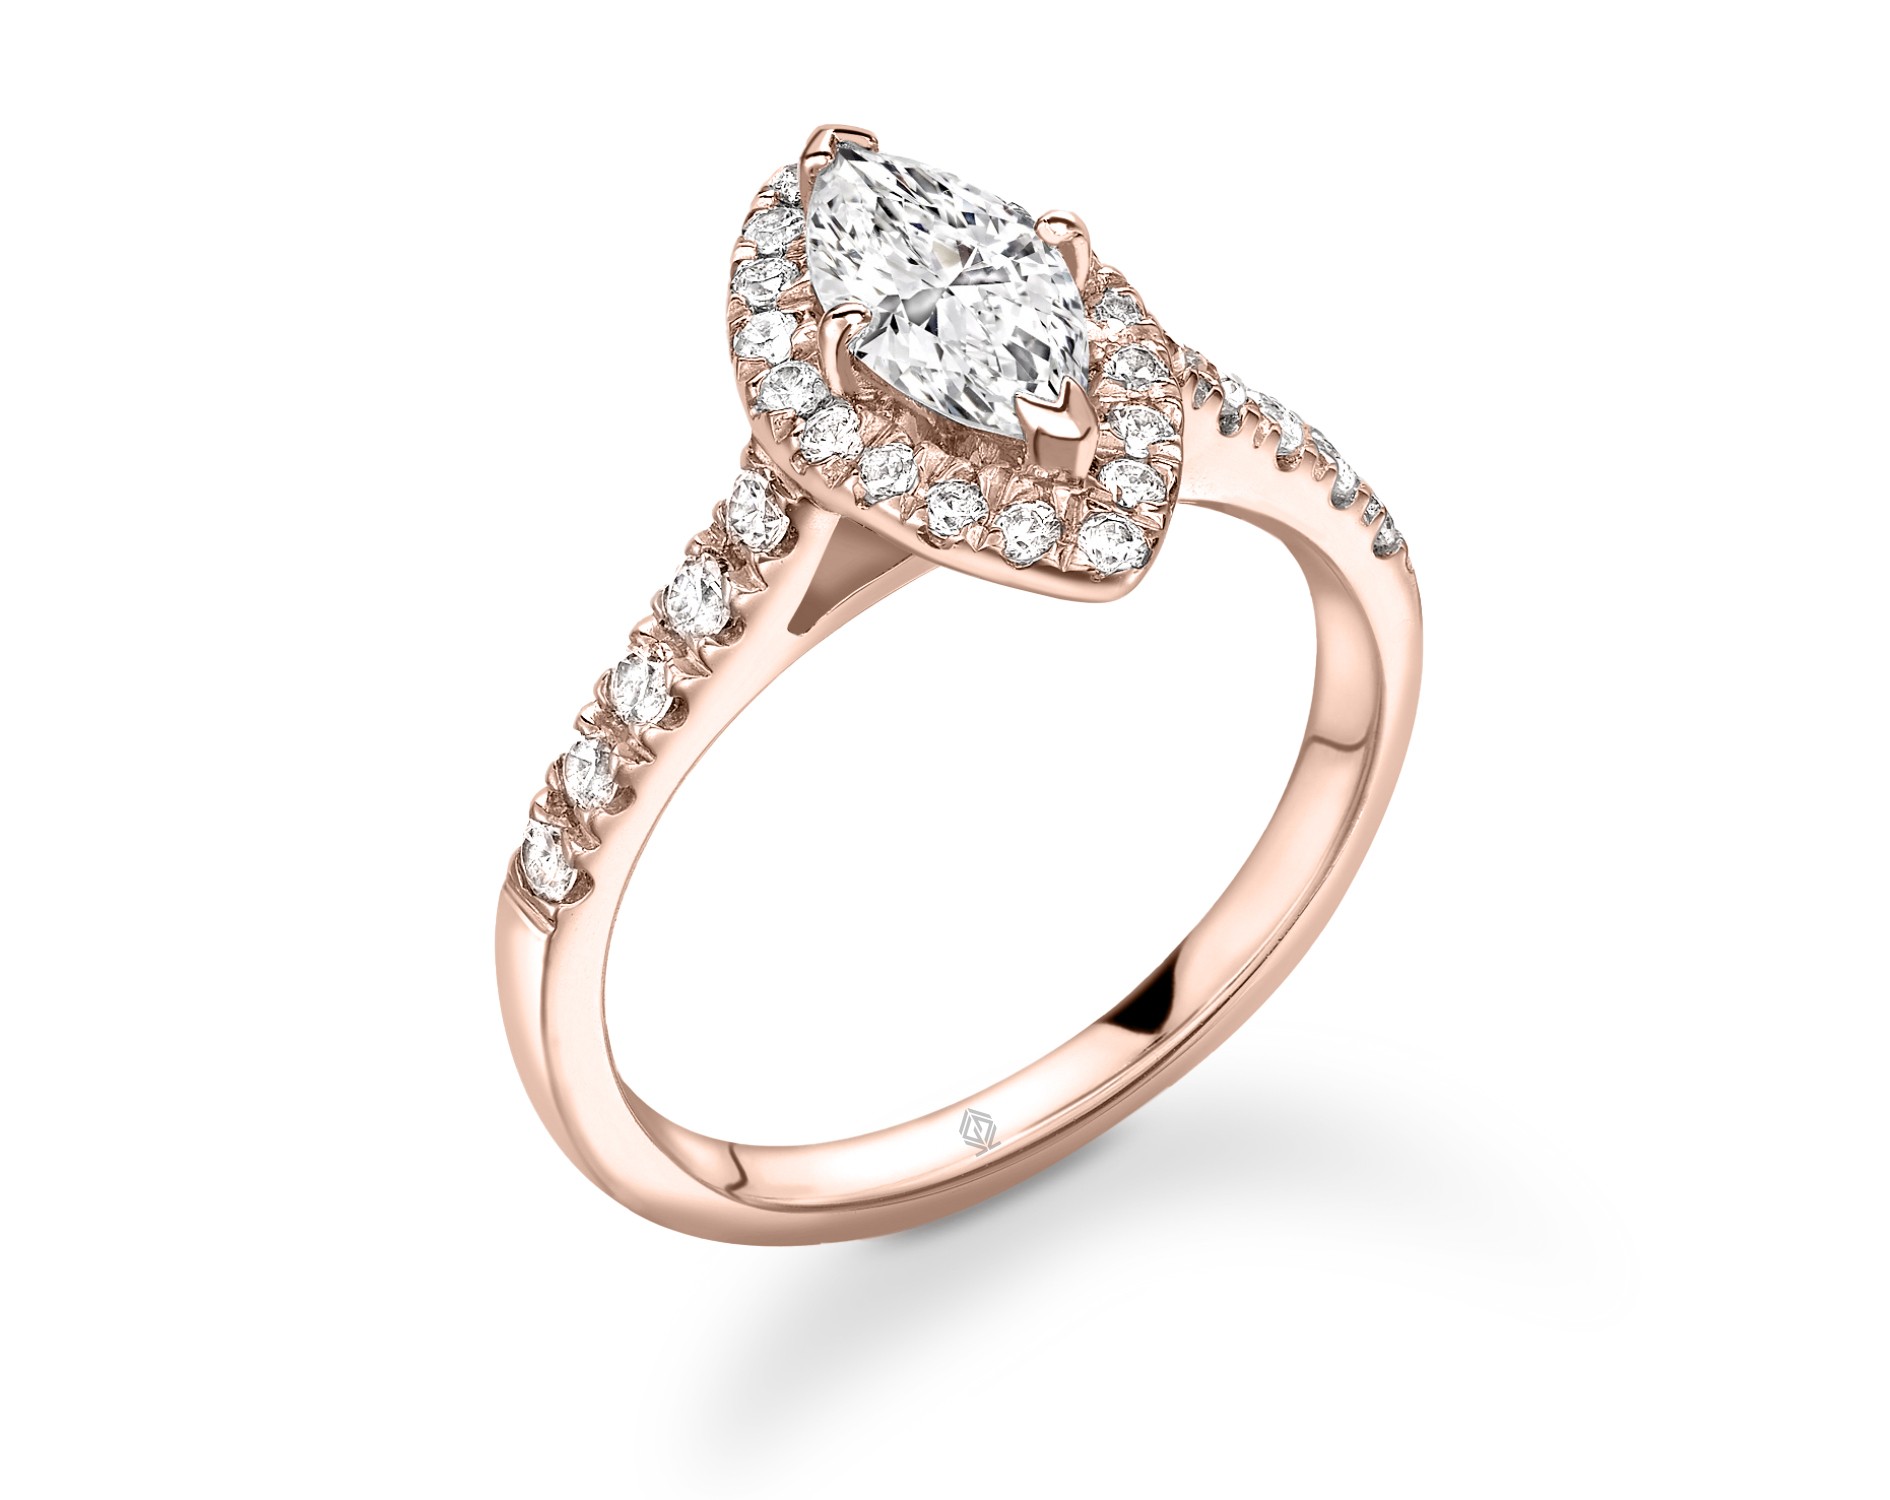 18K ROSE GOLD HALO MARQUISE CUT DIAMOND ENGAGEMENT RING WITH SIDE STONES PAVE SET